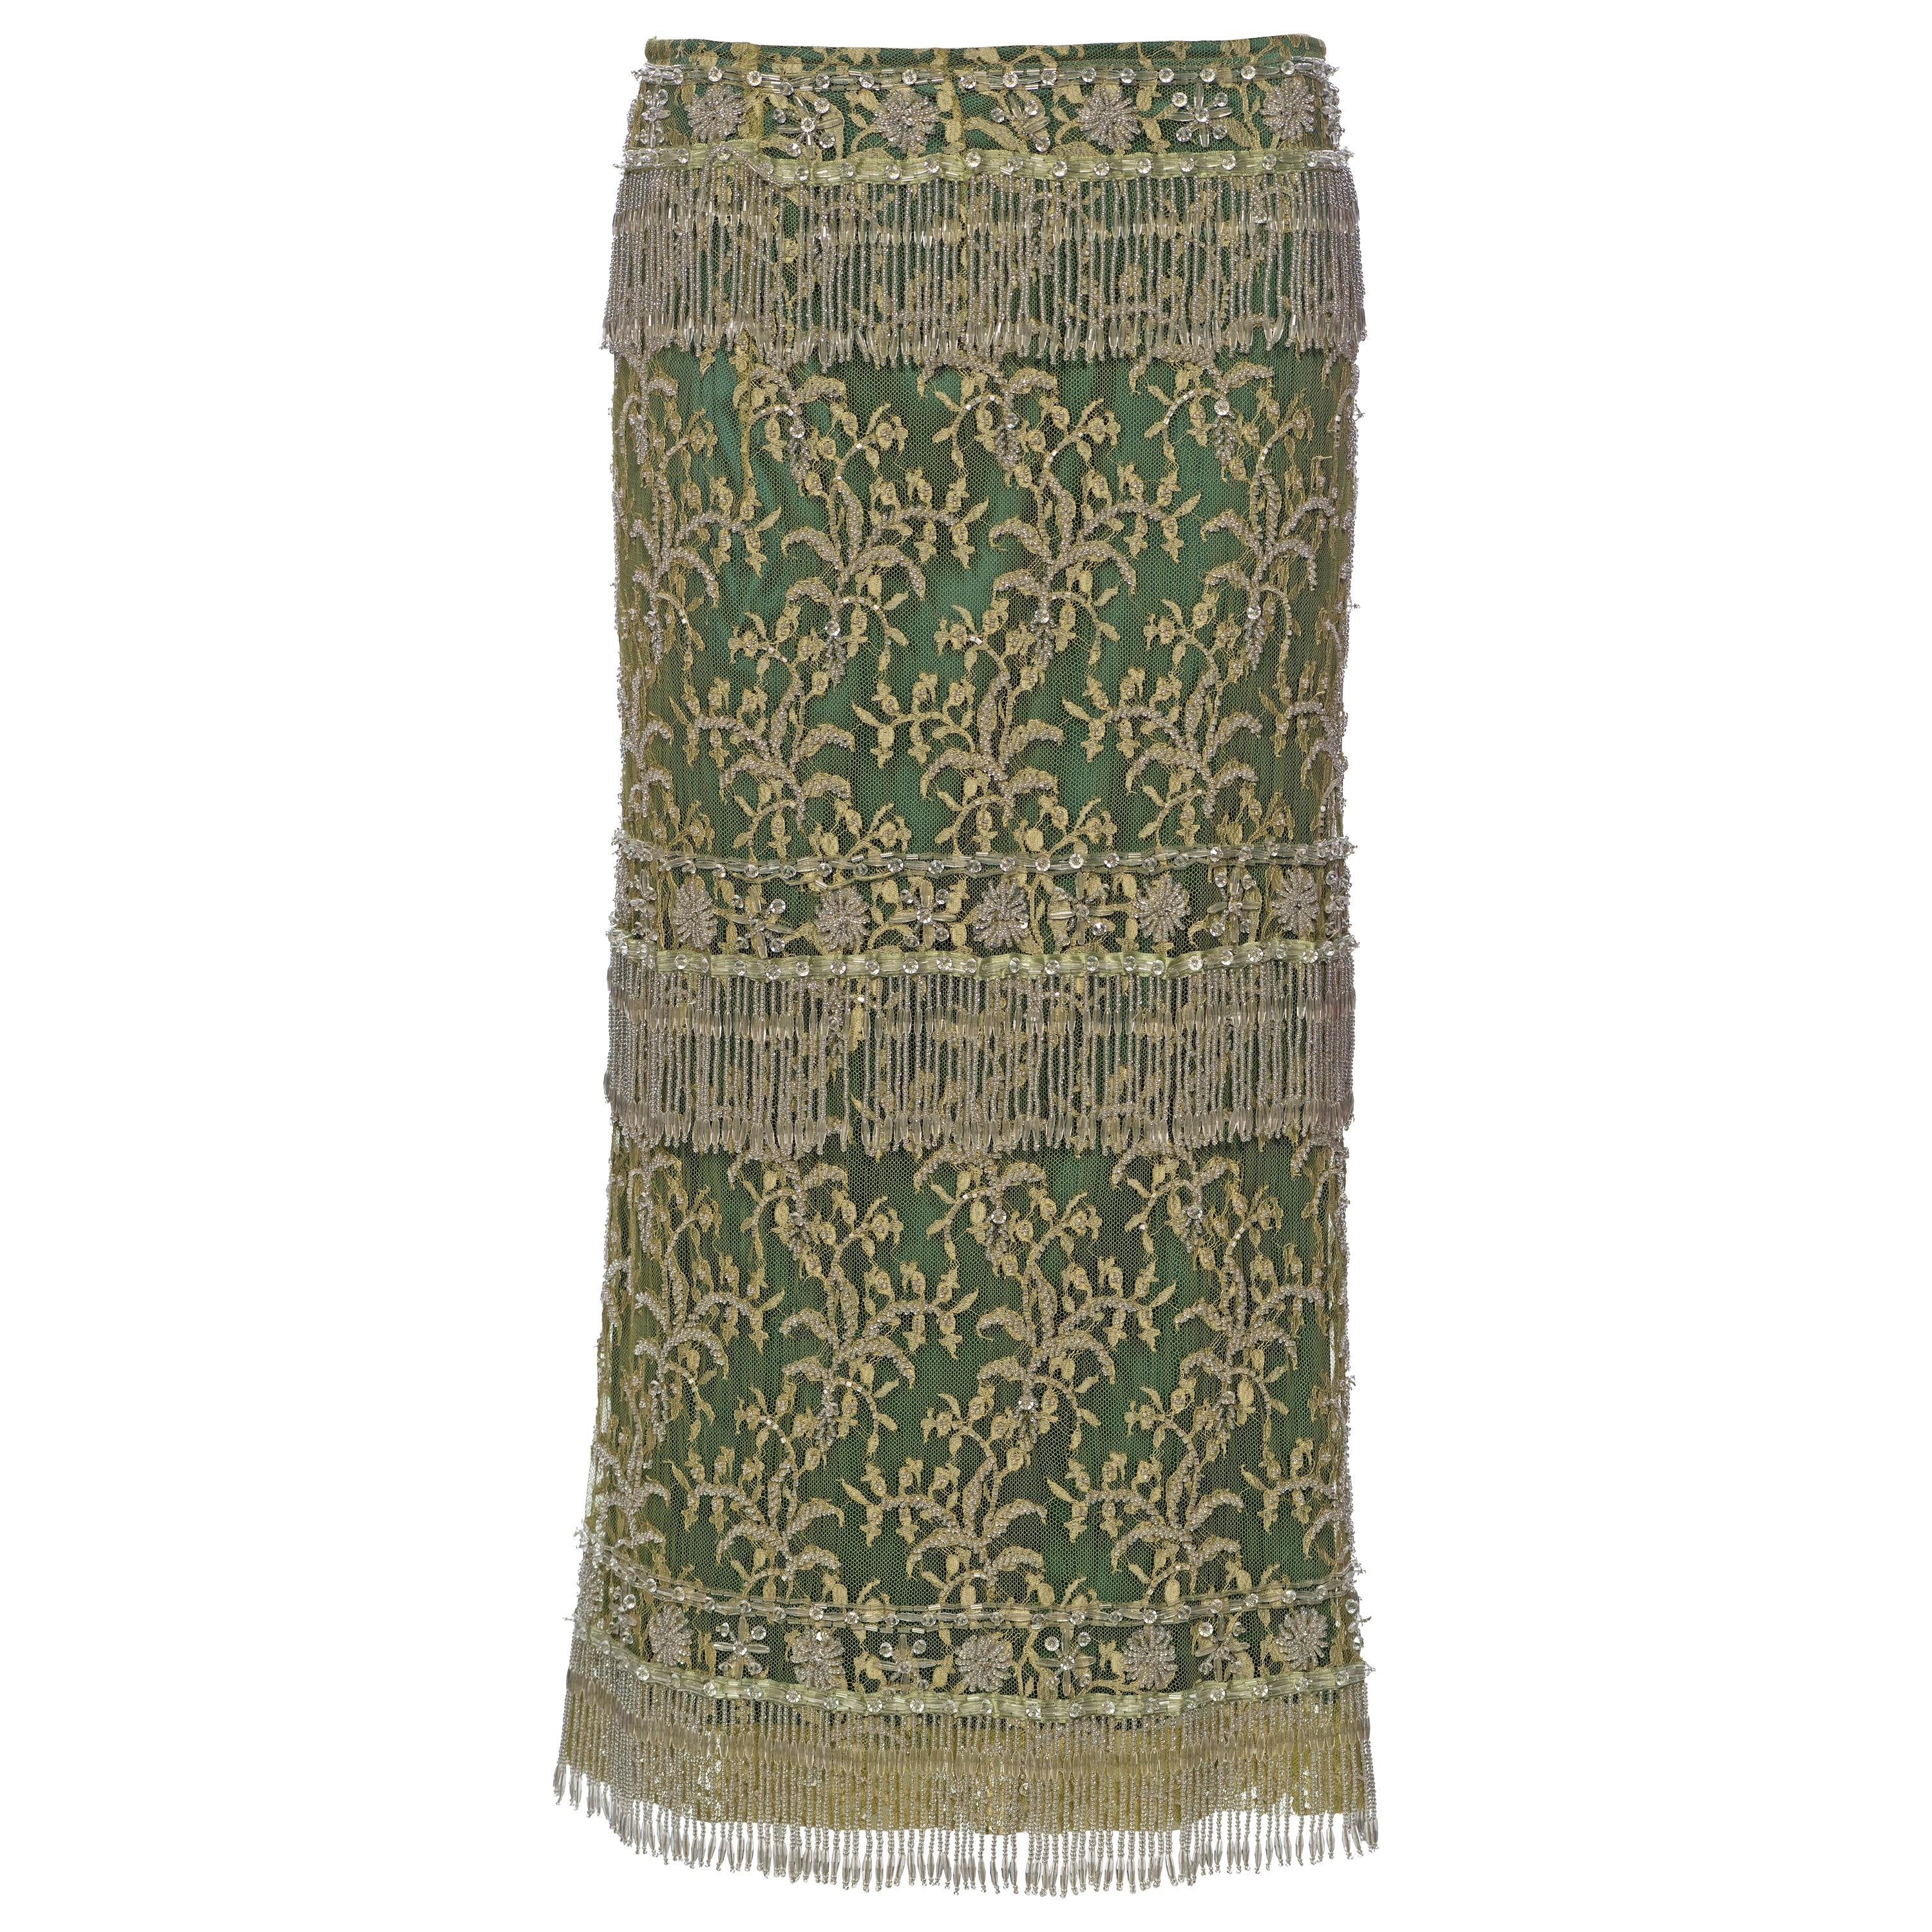 Dolce & Gabbana Beaded Chartreuse Lace Evening Skirt, ss 2000 For Sale